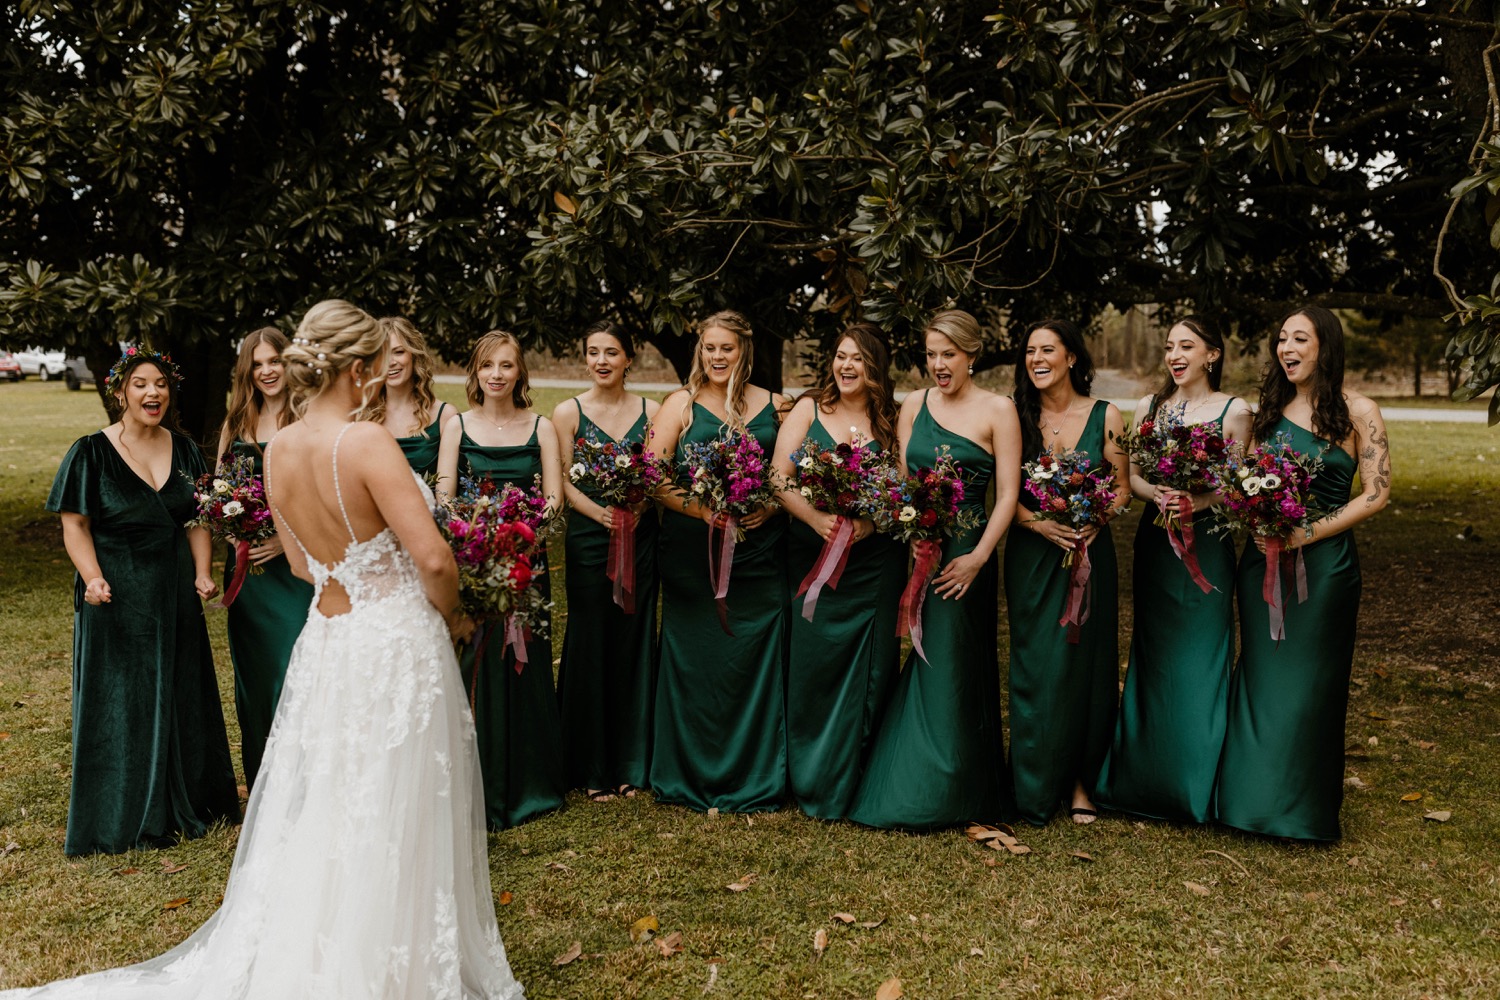 bride and bridesmaids first look